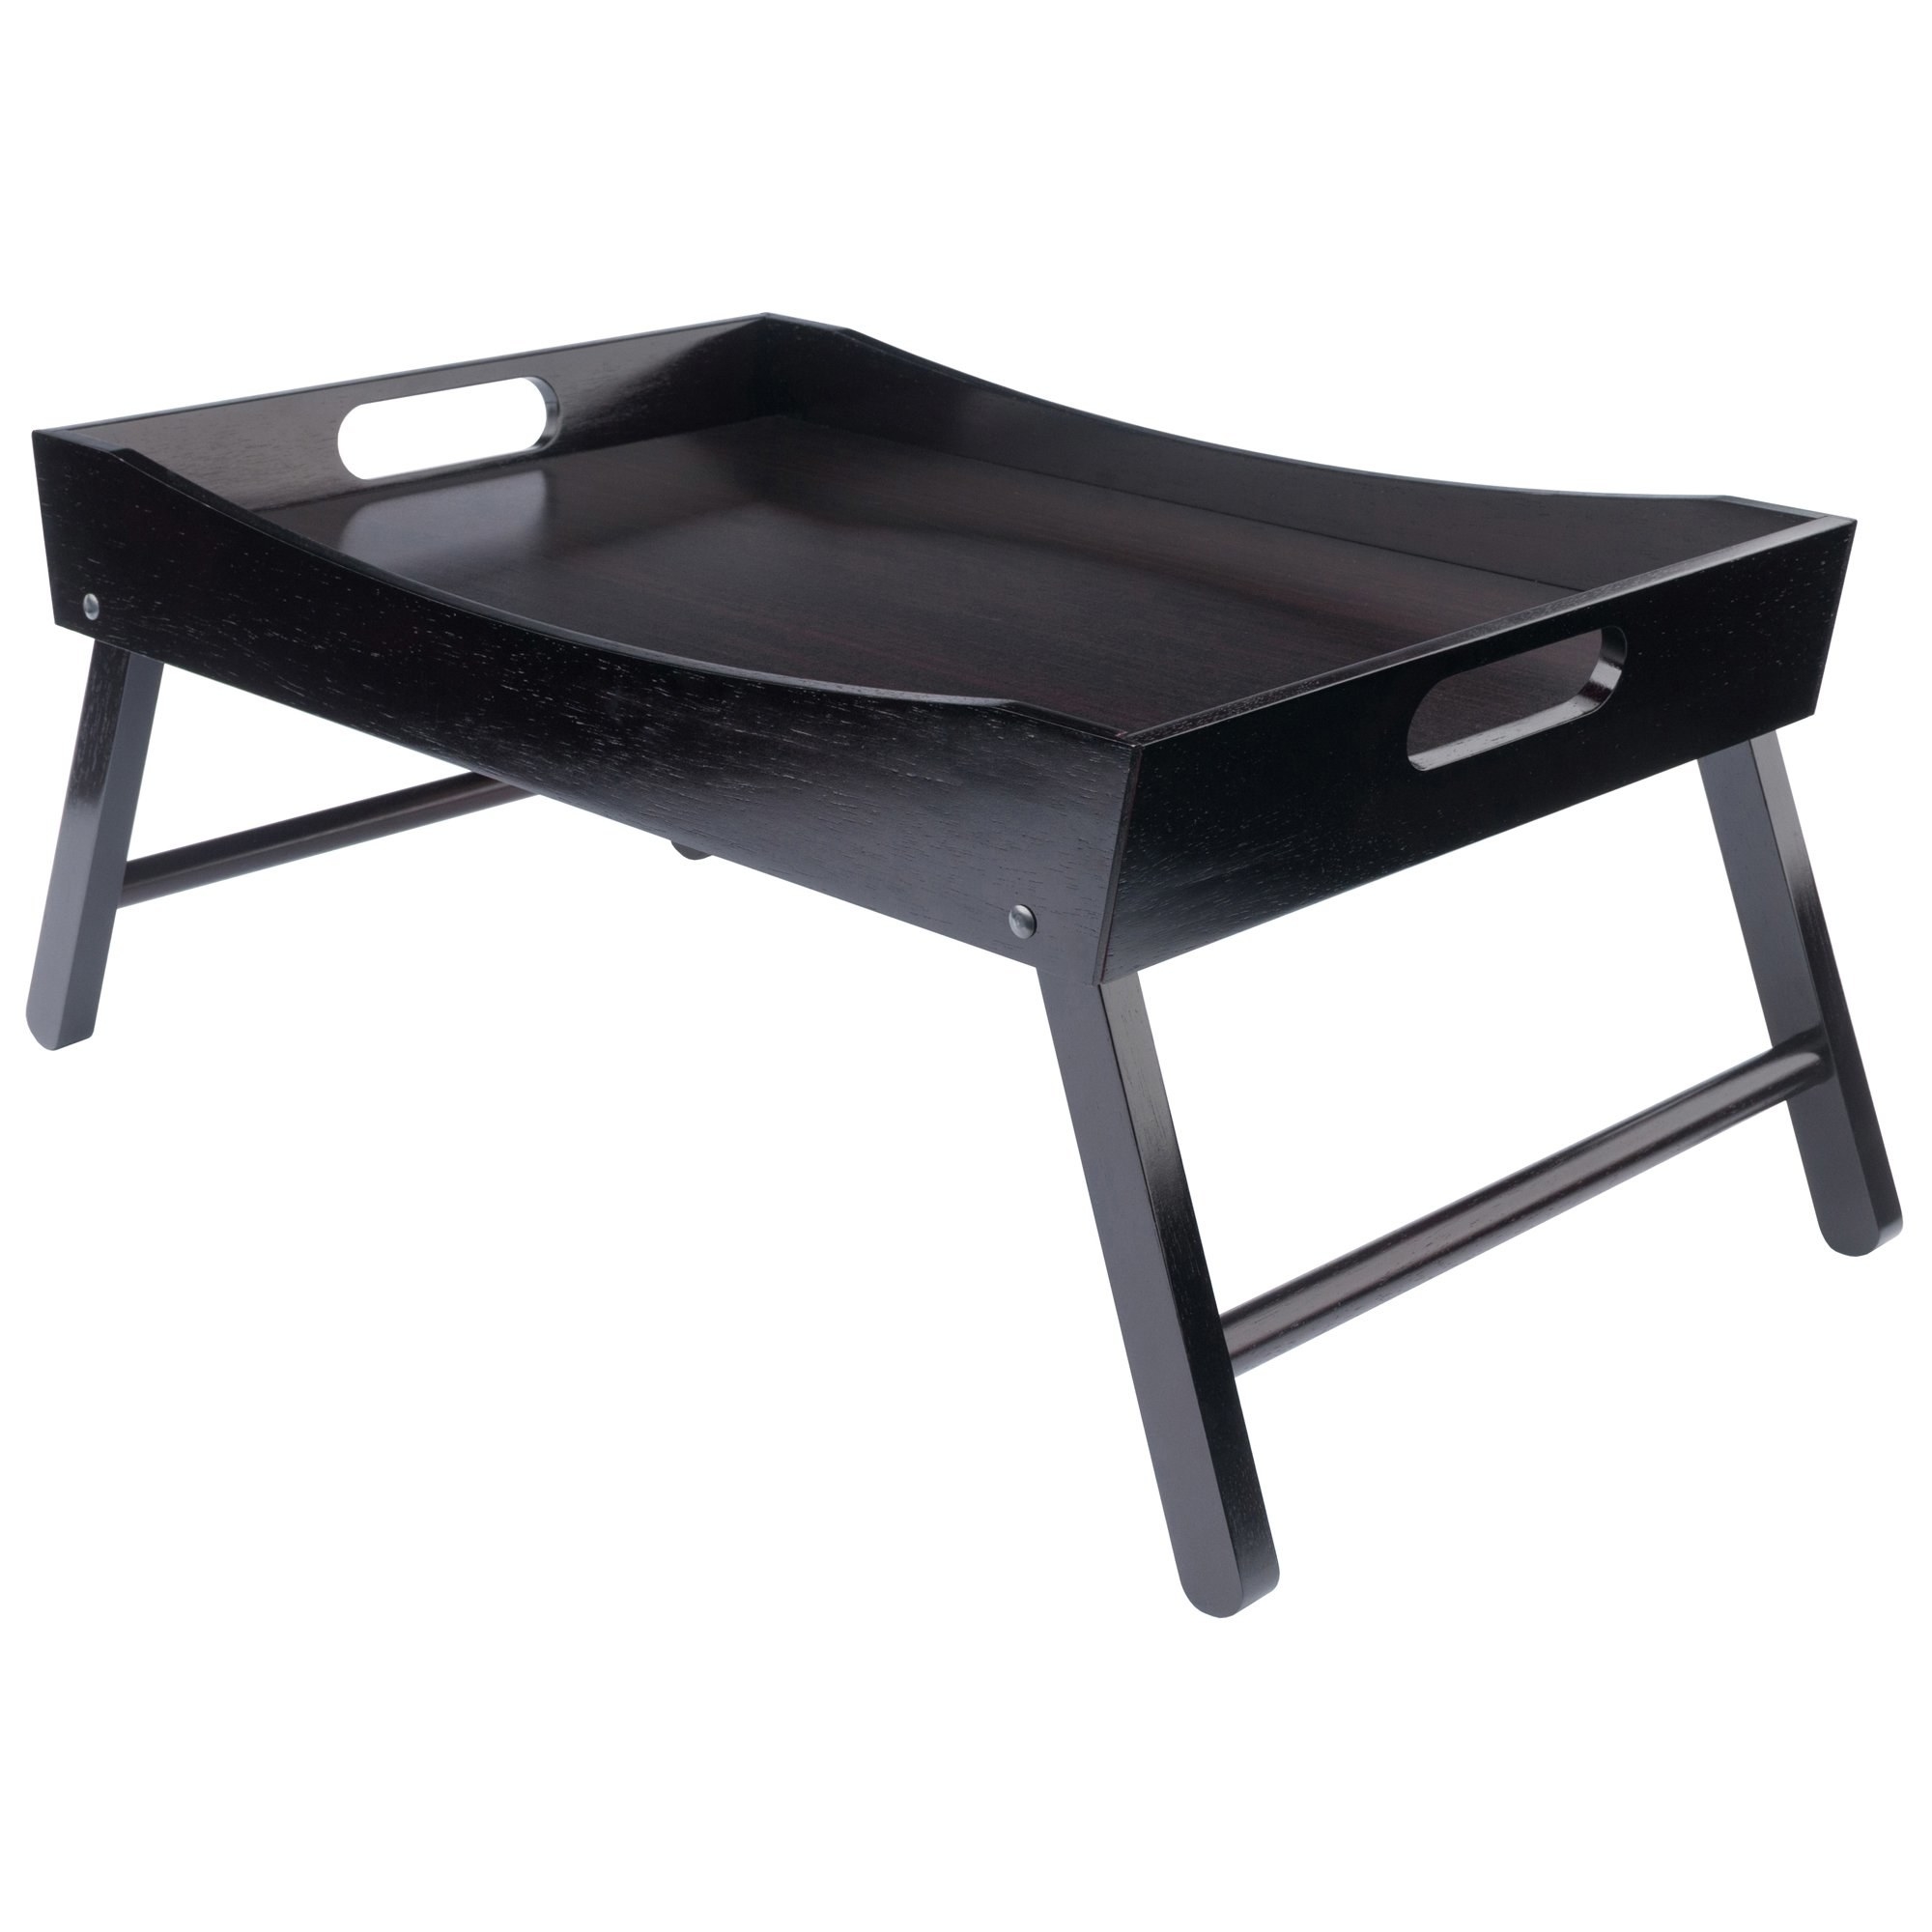 the black tray with the legs extended